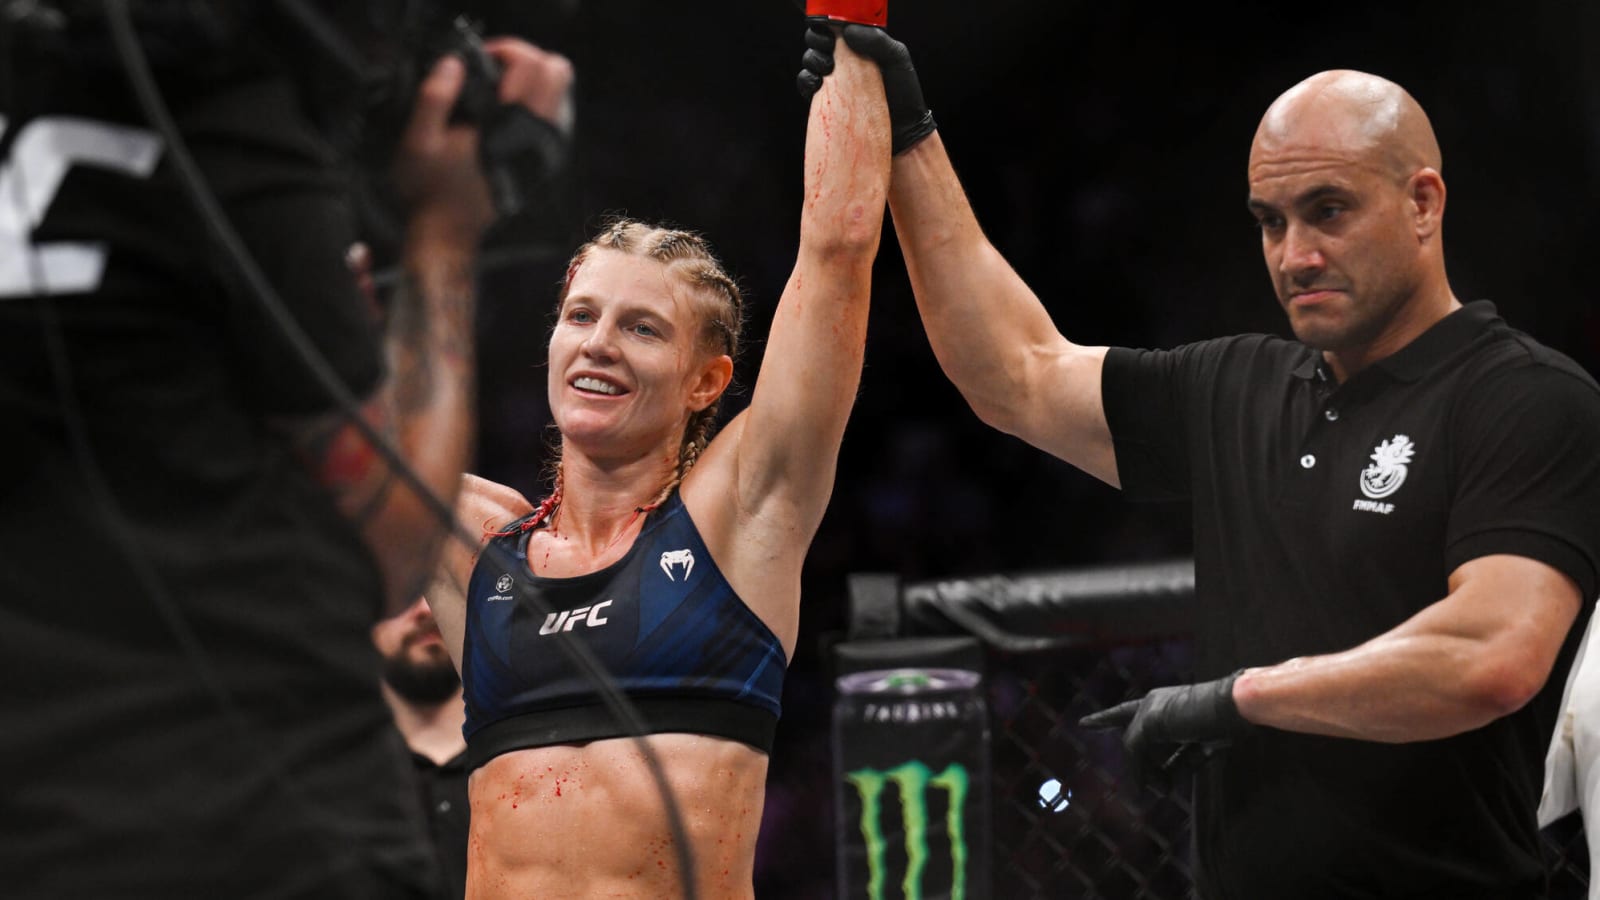 After defeating a former champion at UFC Paris, is a title shot next for Manon Fiorot?